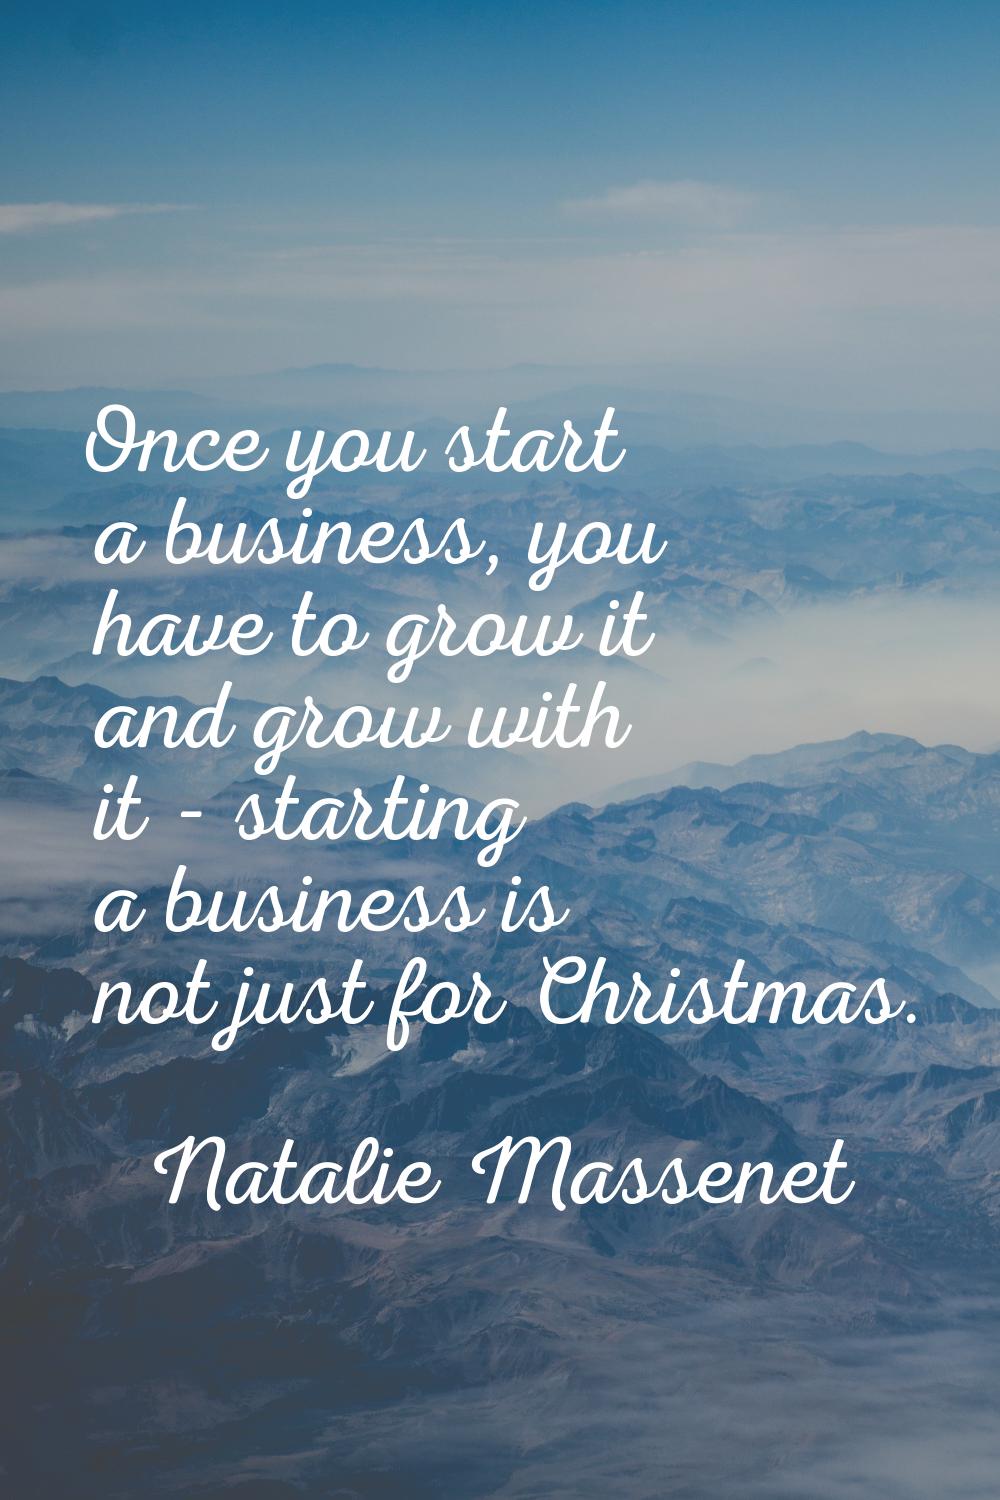 Once you start a business, you have to grow it and grow with it - starting a business is not just f